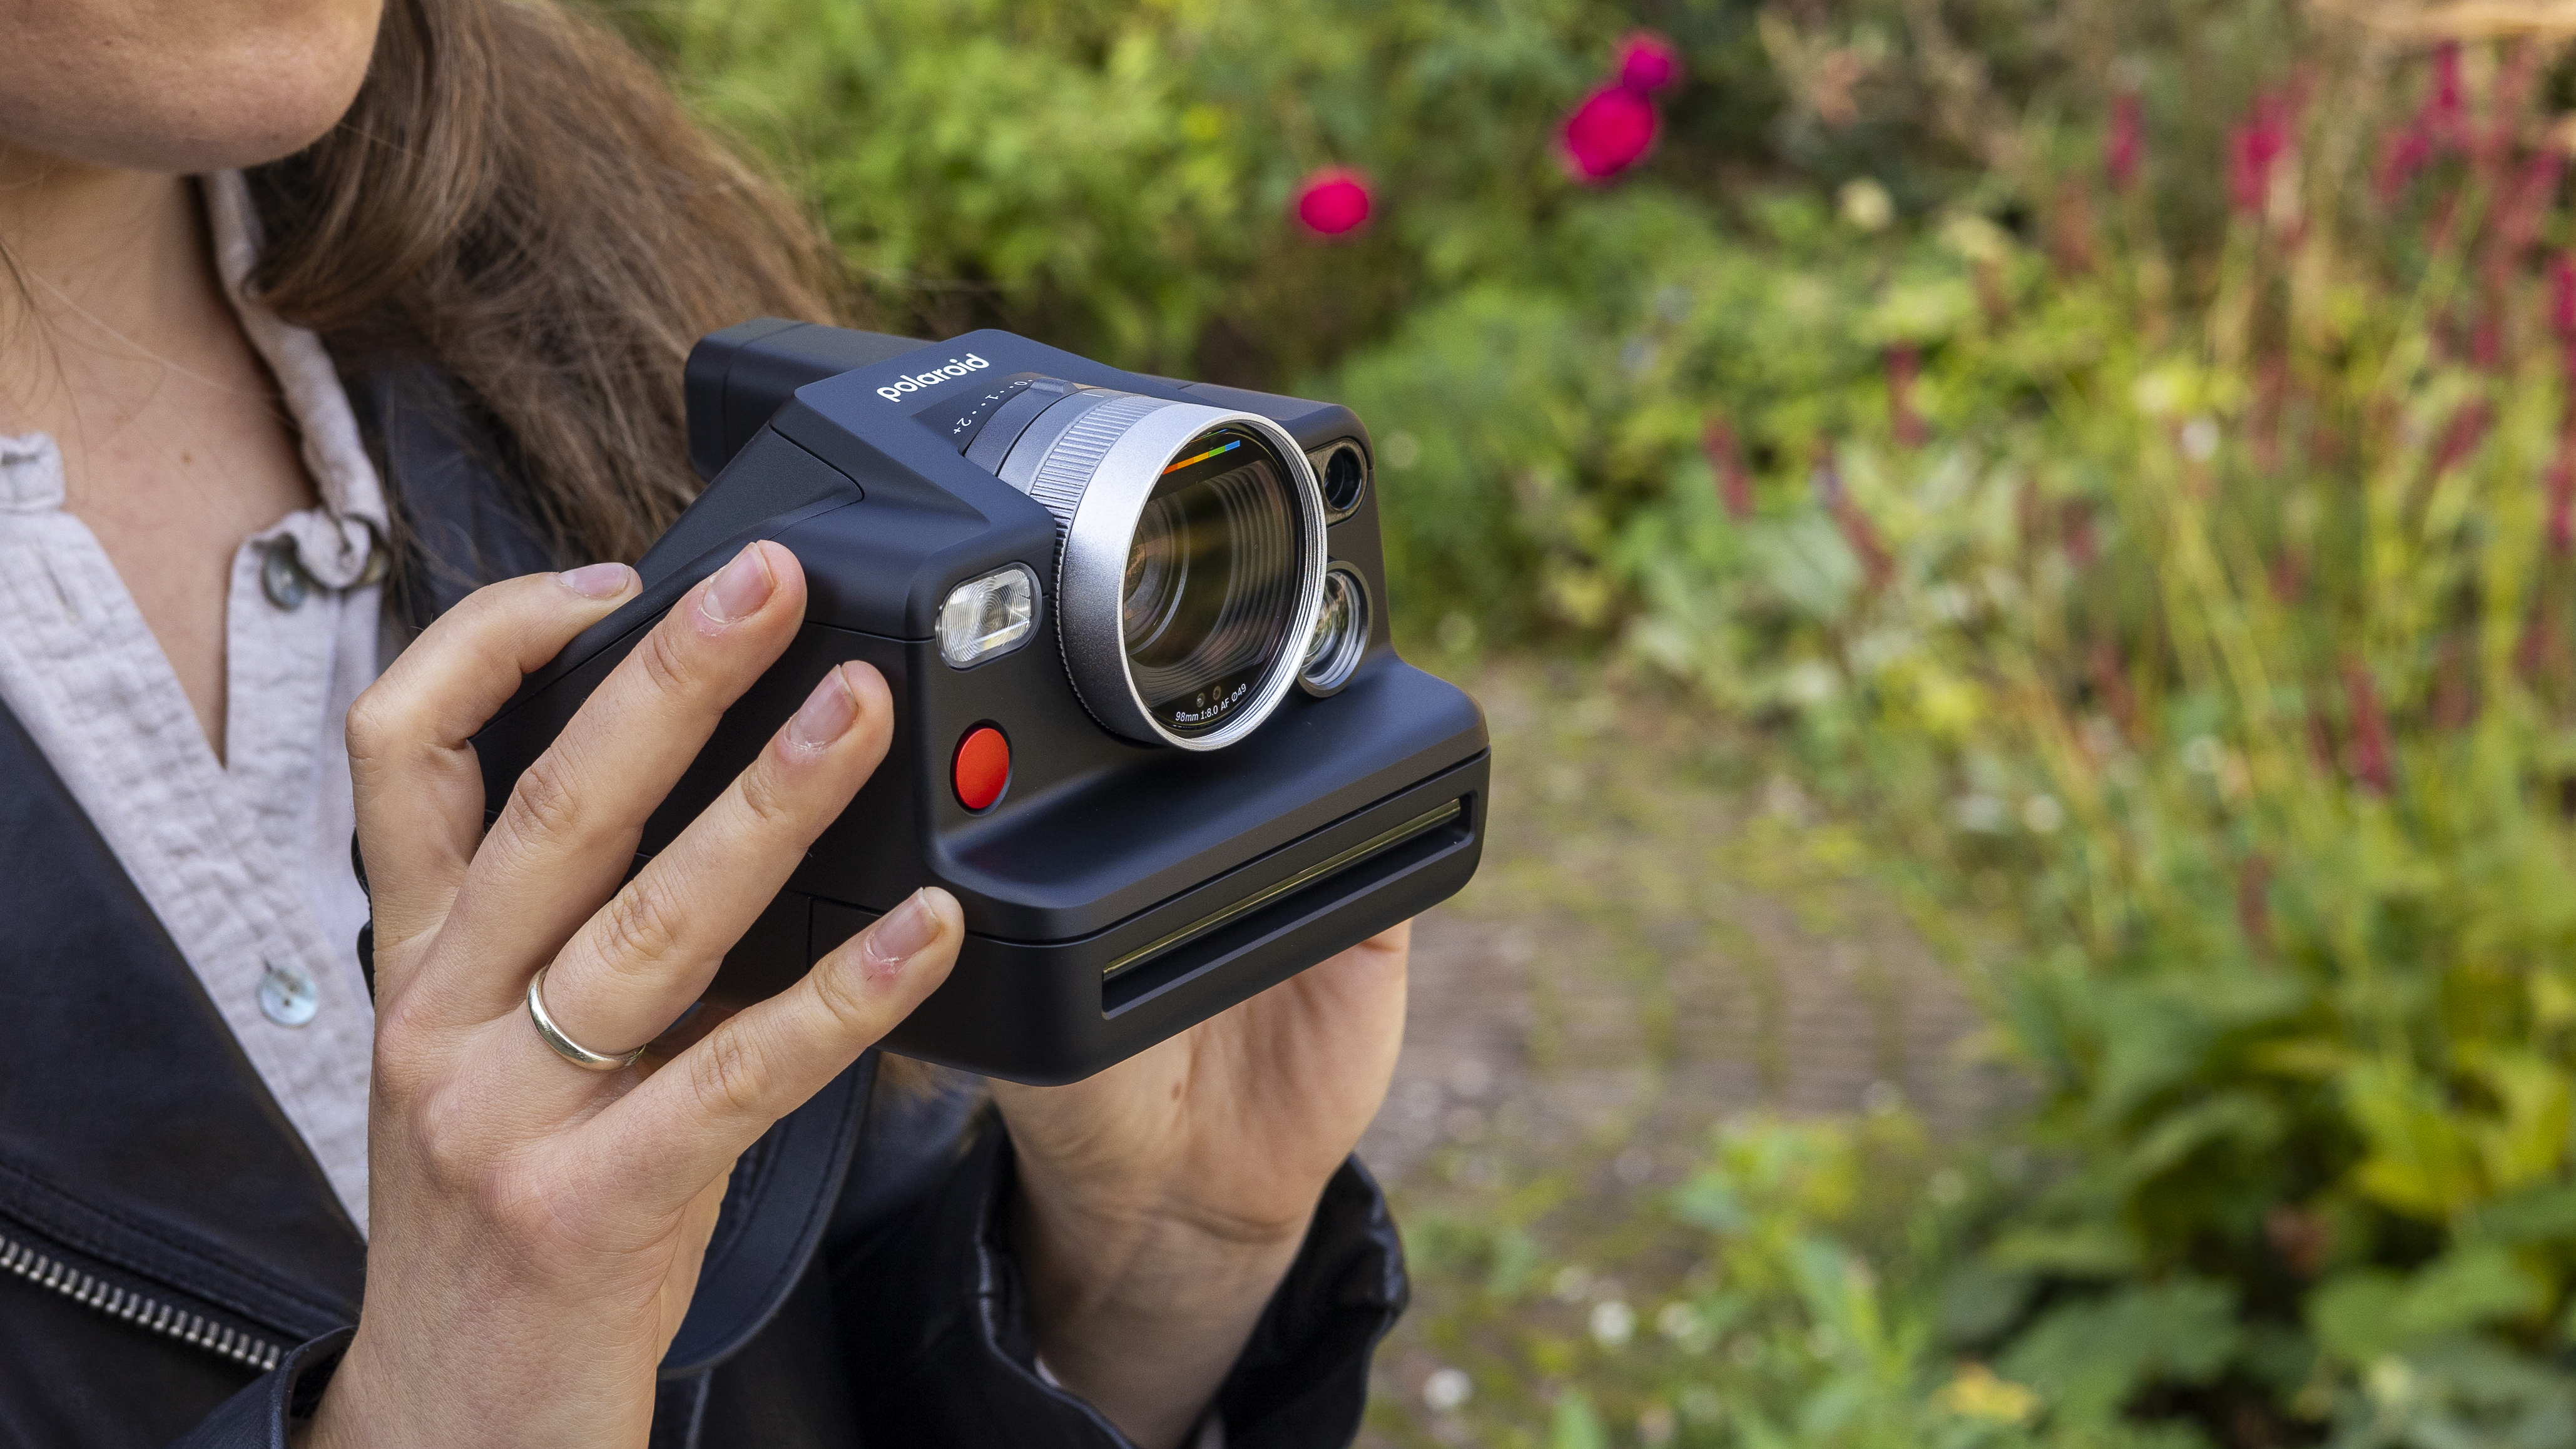 A female photographer holding the Polaroid I-2 instant camera in her hands